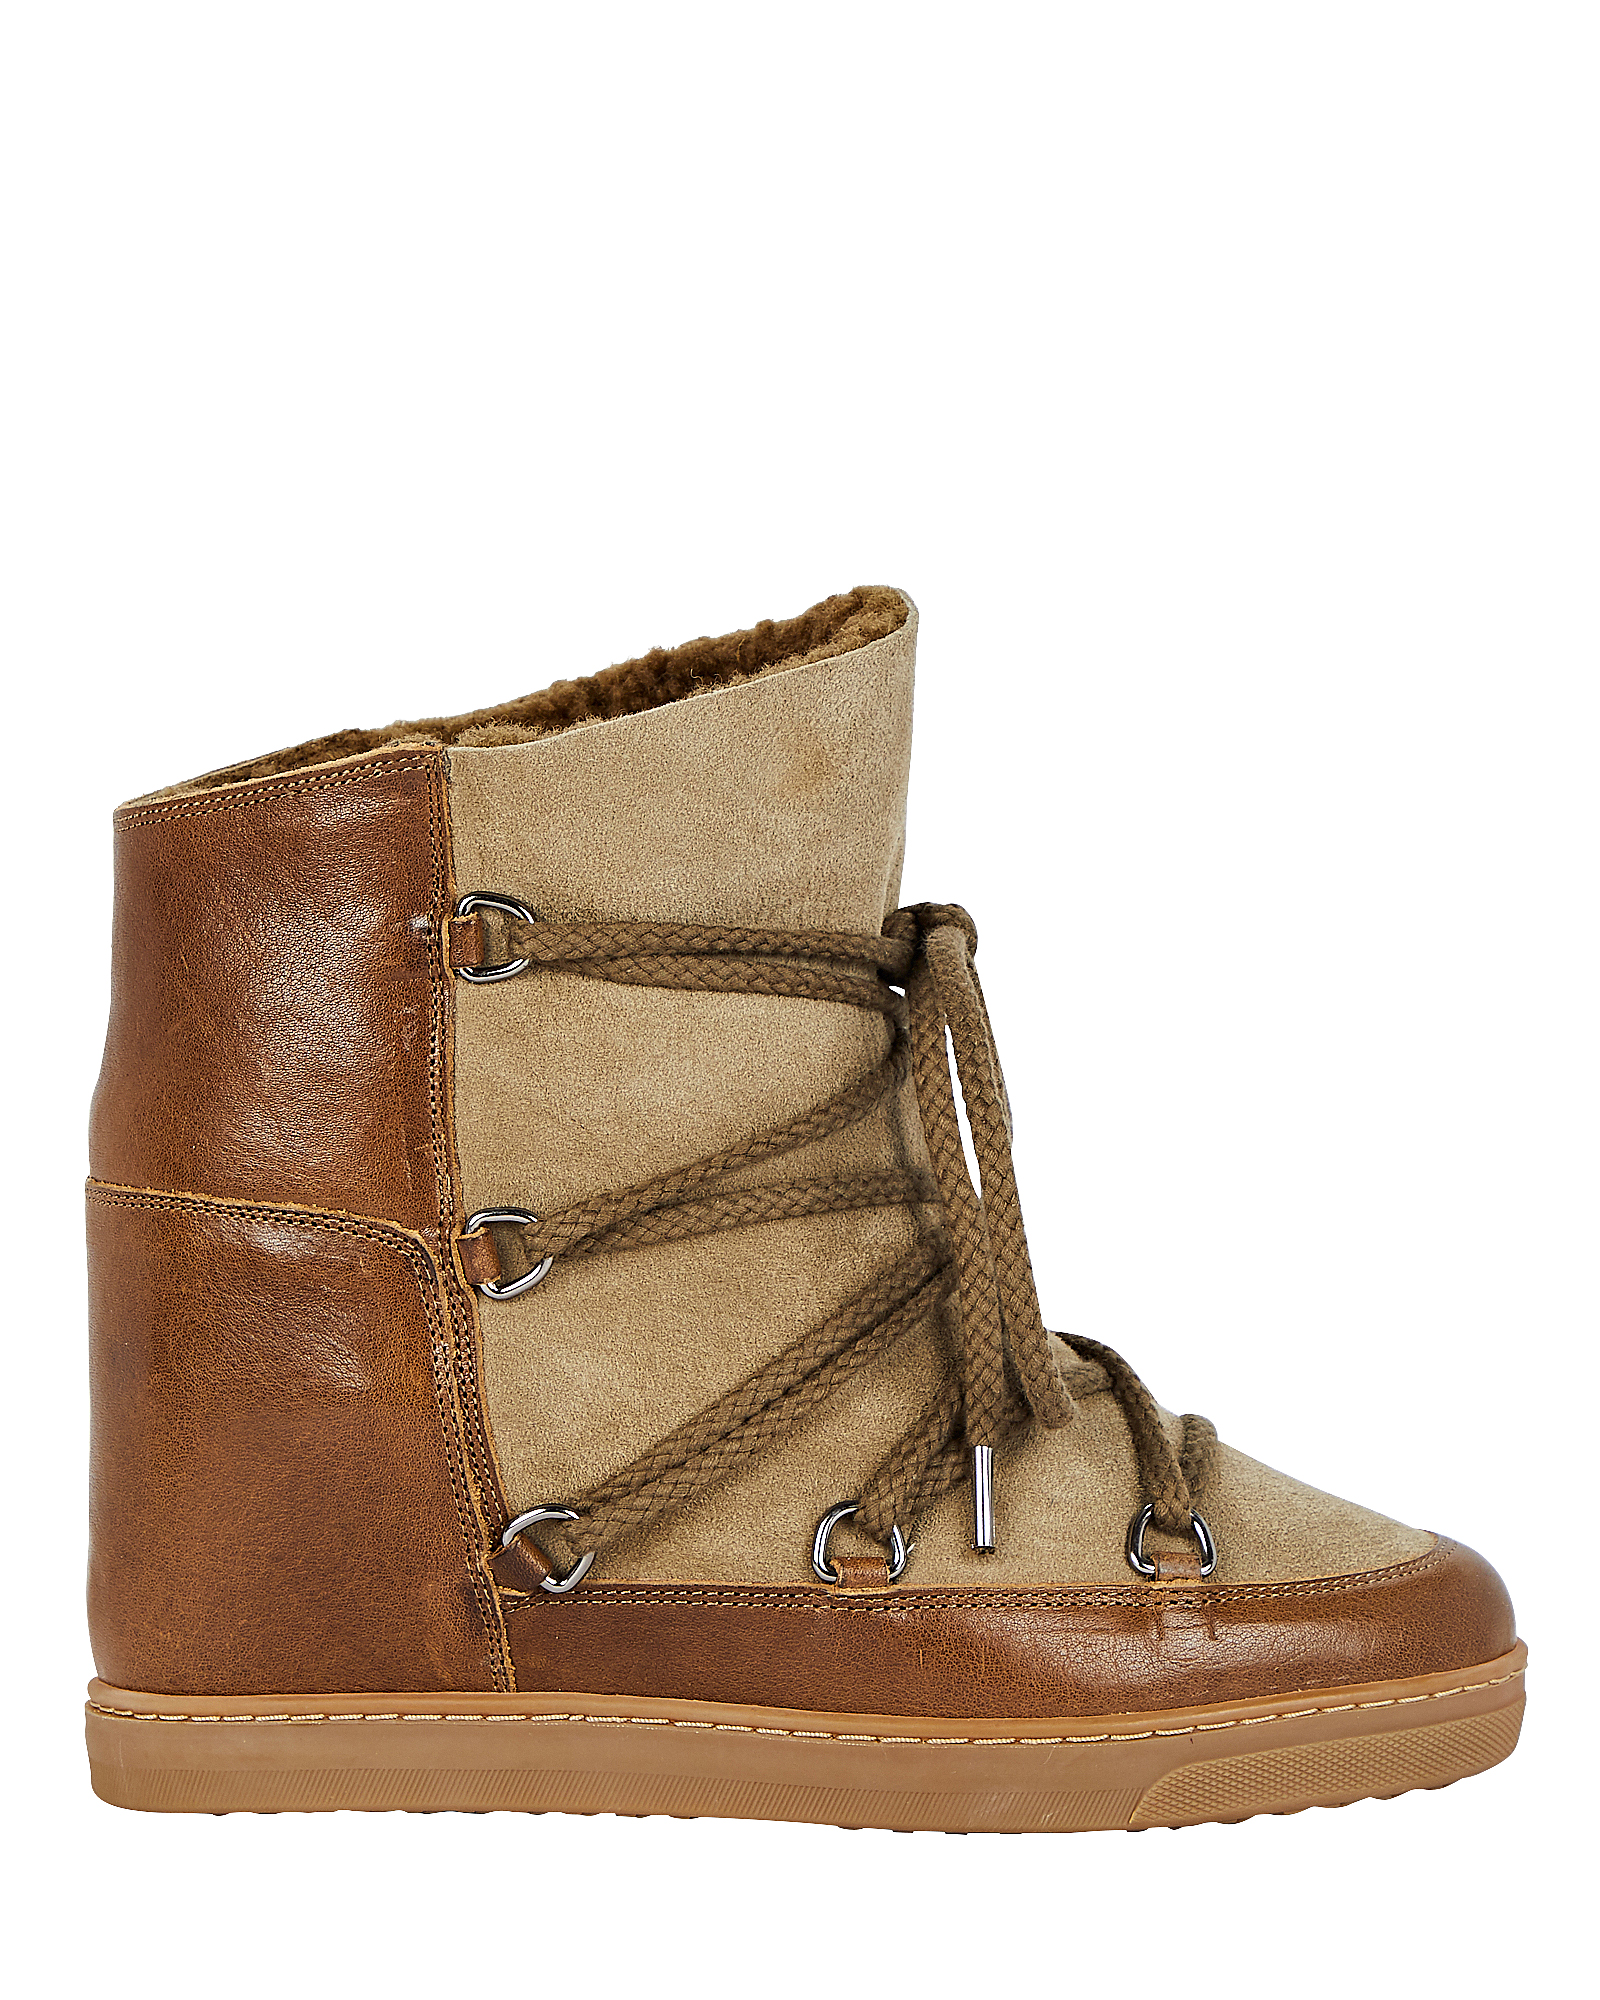 Isabel Marant Nowles Shearling Booties | INTERMIX®